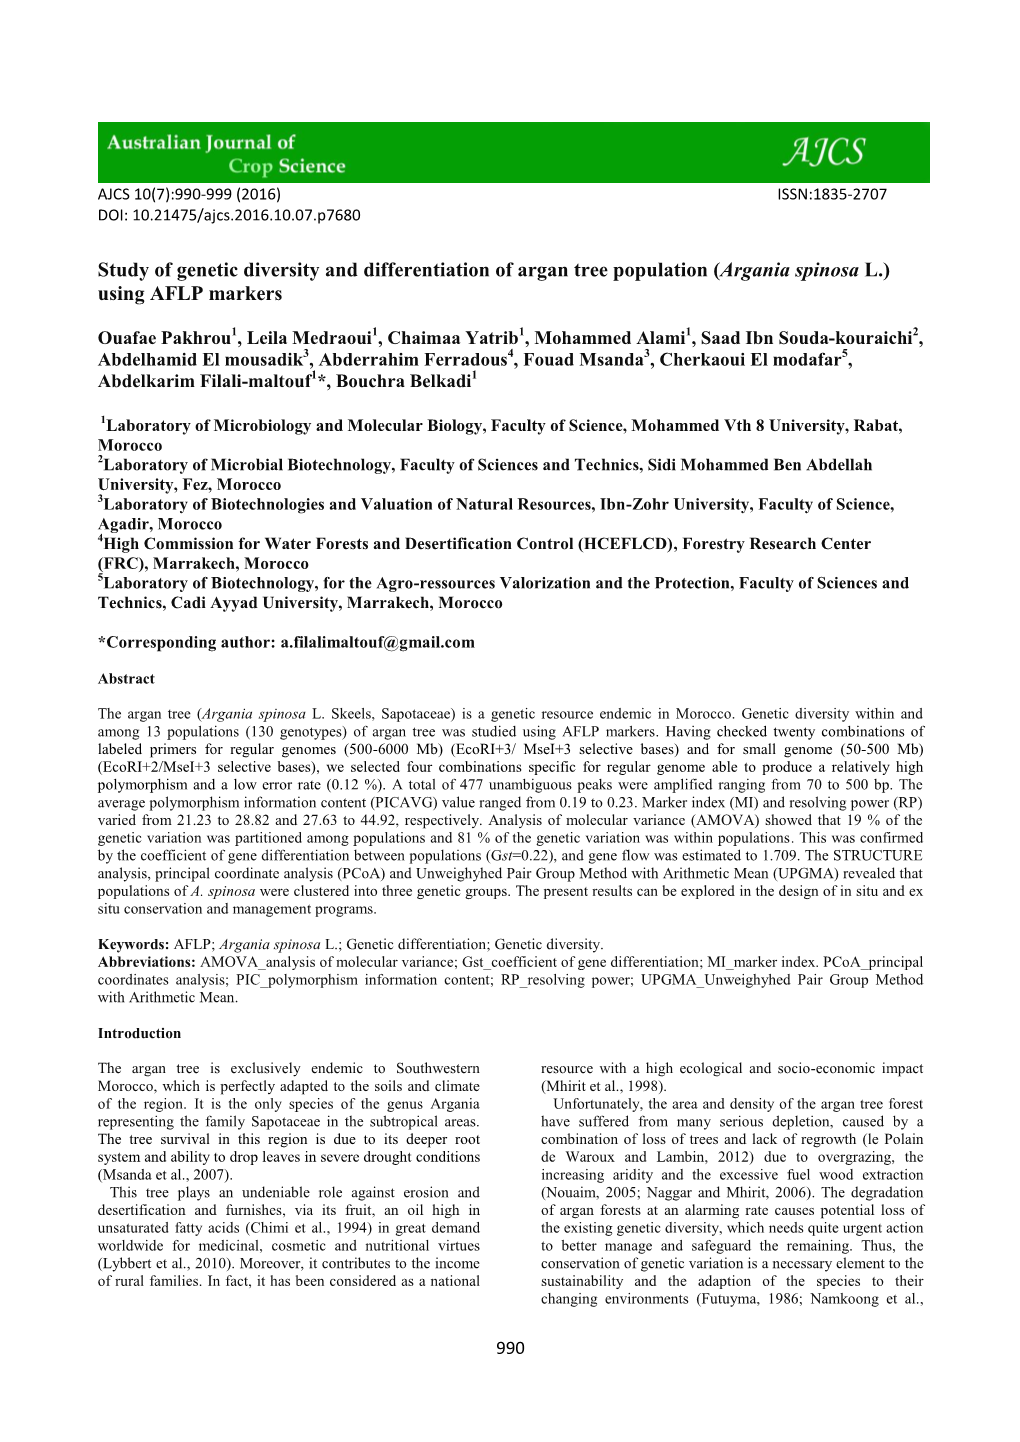 Study of Genetic Diversity and Differentiation of Argan Tree Population (Argania Spinosa L.) Using AFLP Markers